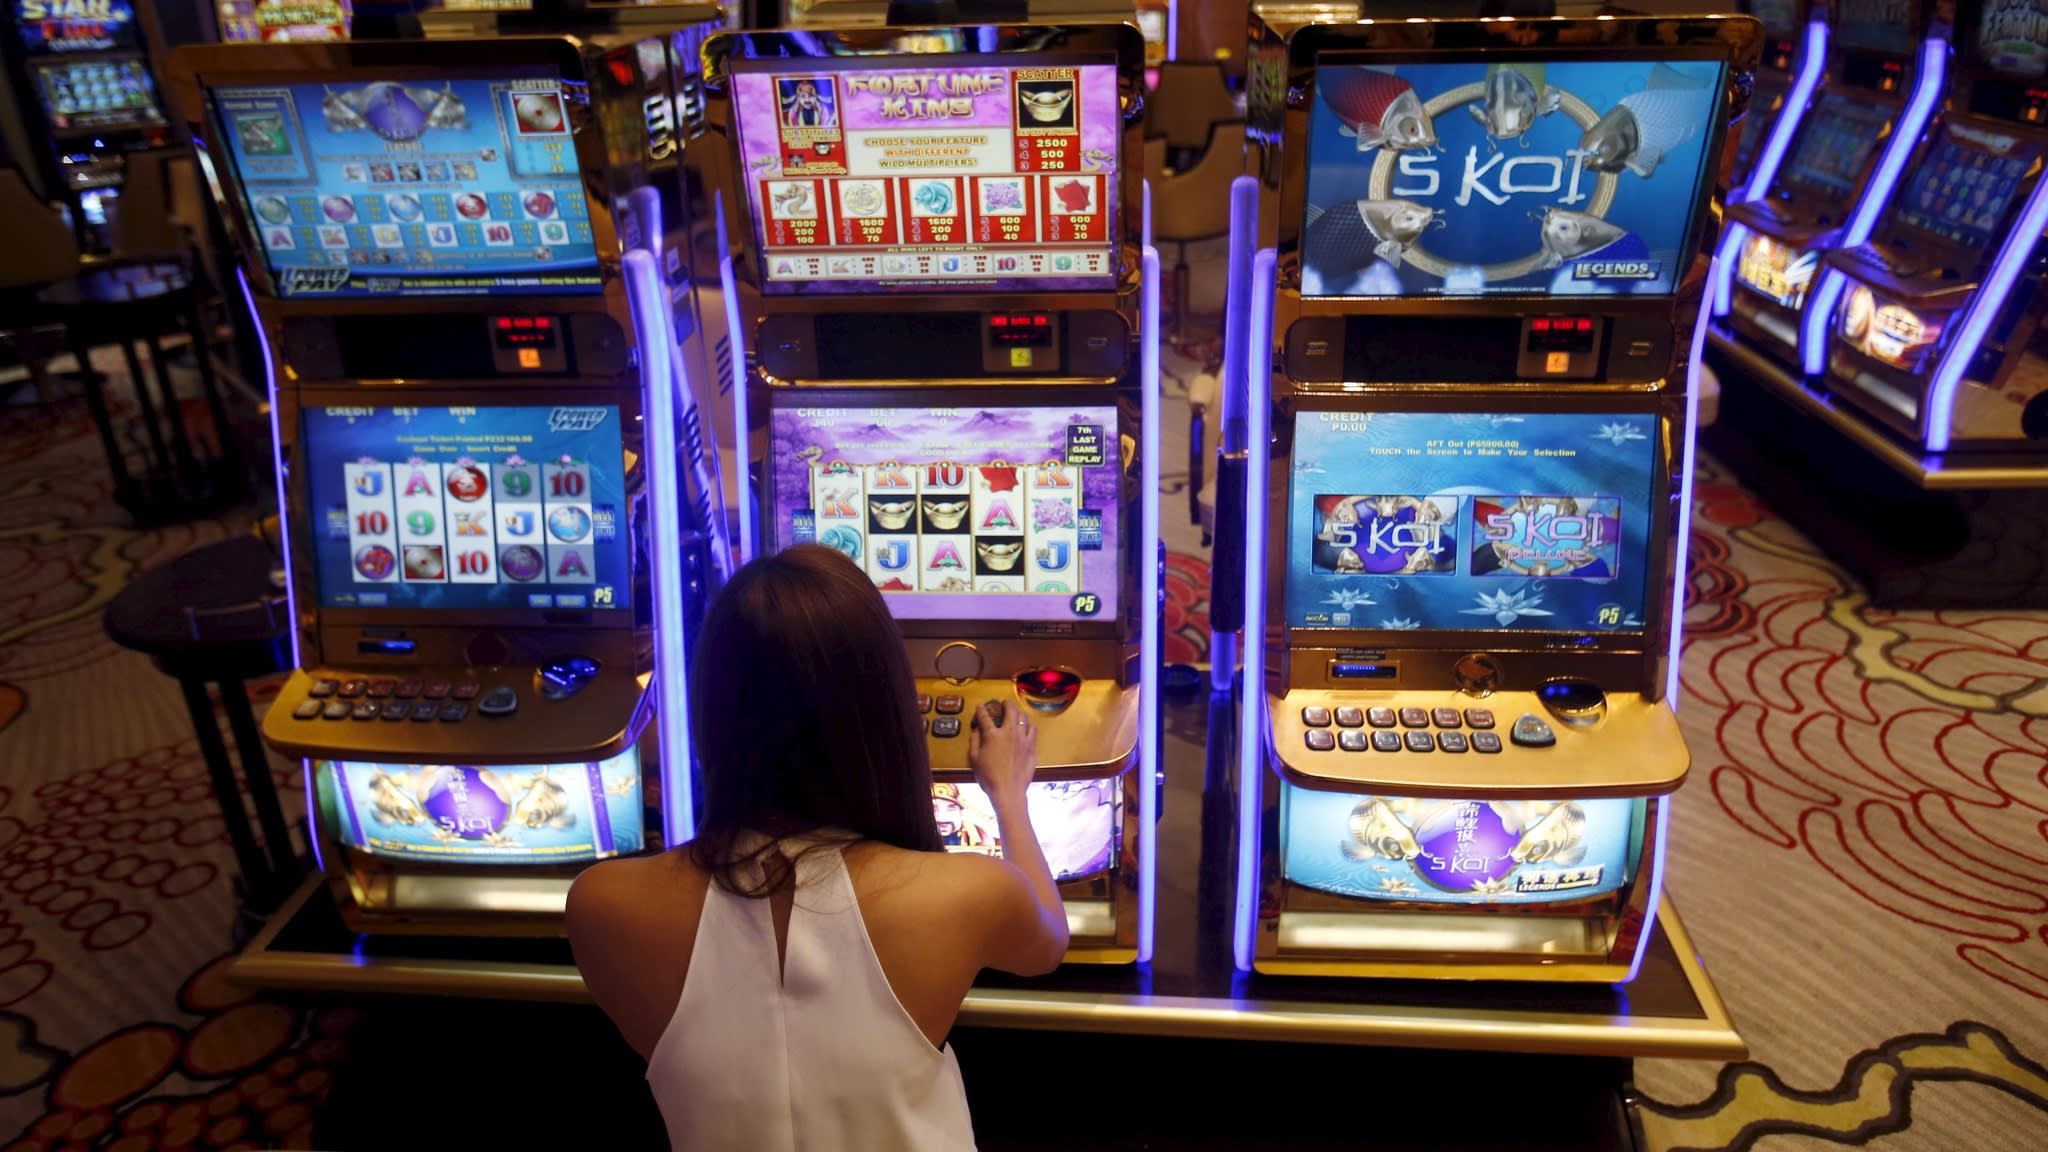 slot gaming jackpots will increase your chances